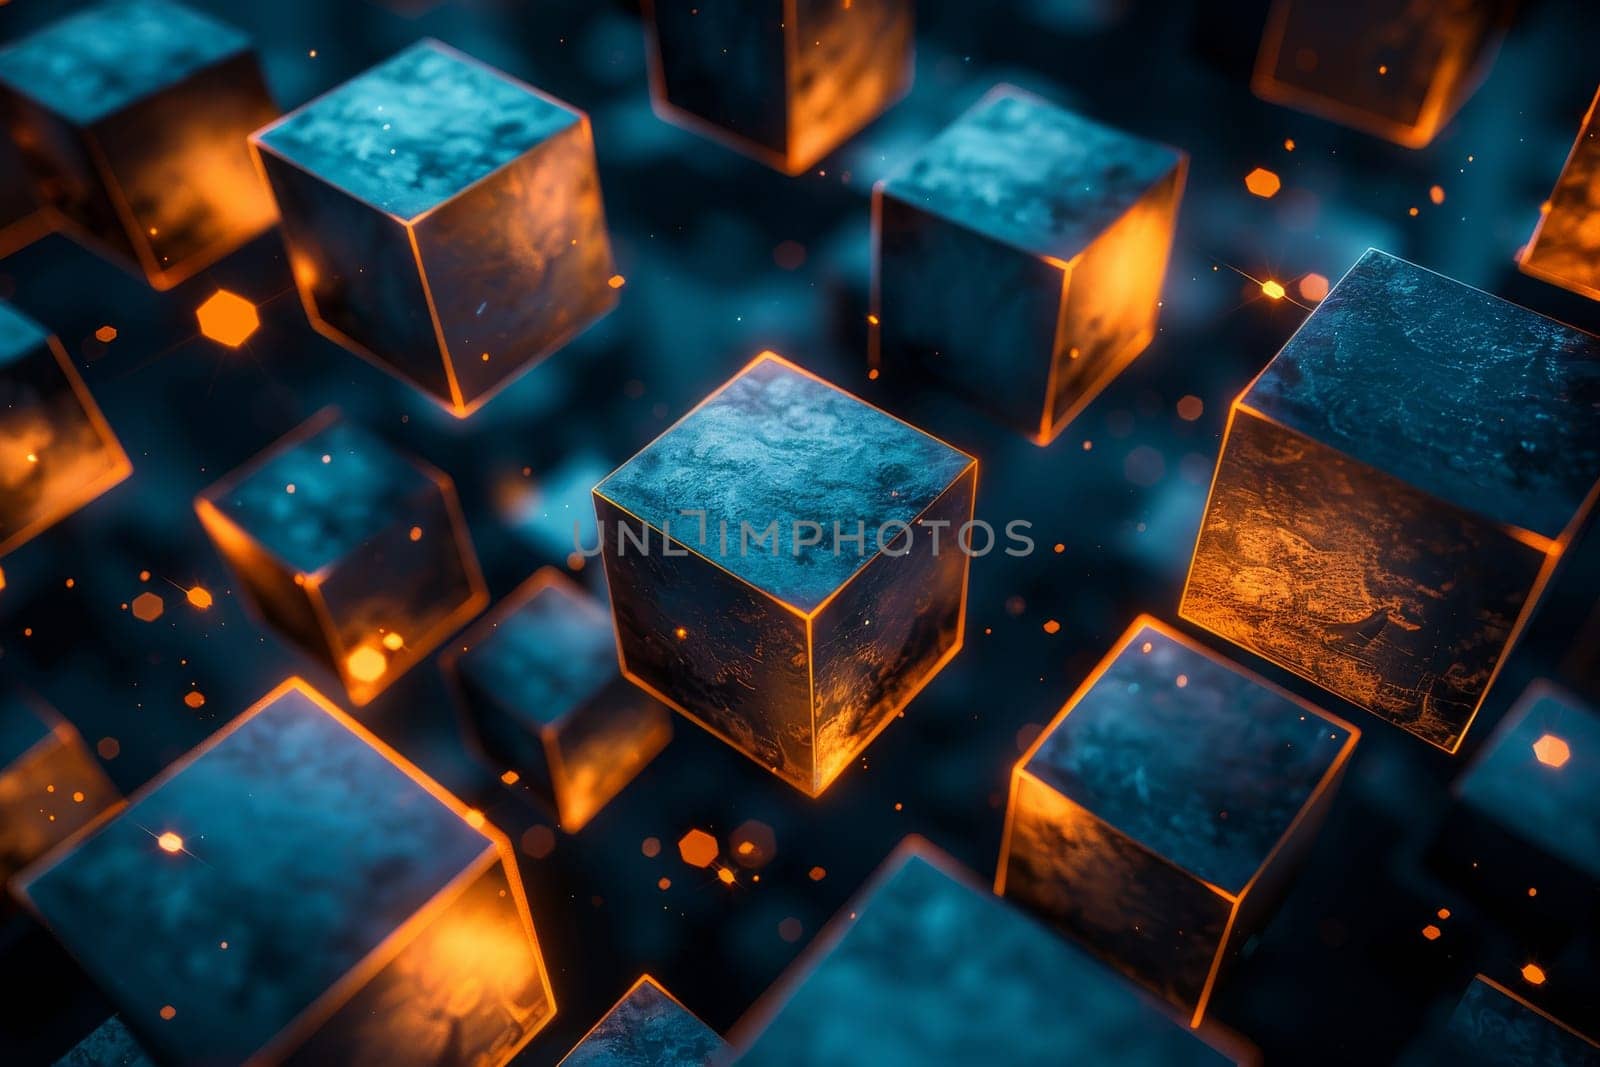 A close up of a bunch of cubes with a blue background. The cubes are lit up with orange lights, giving the image a futuristic and industrial feel